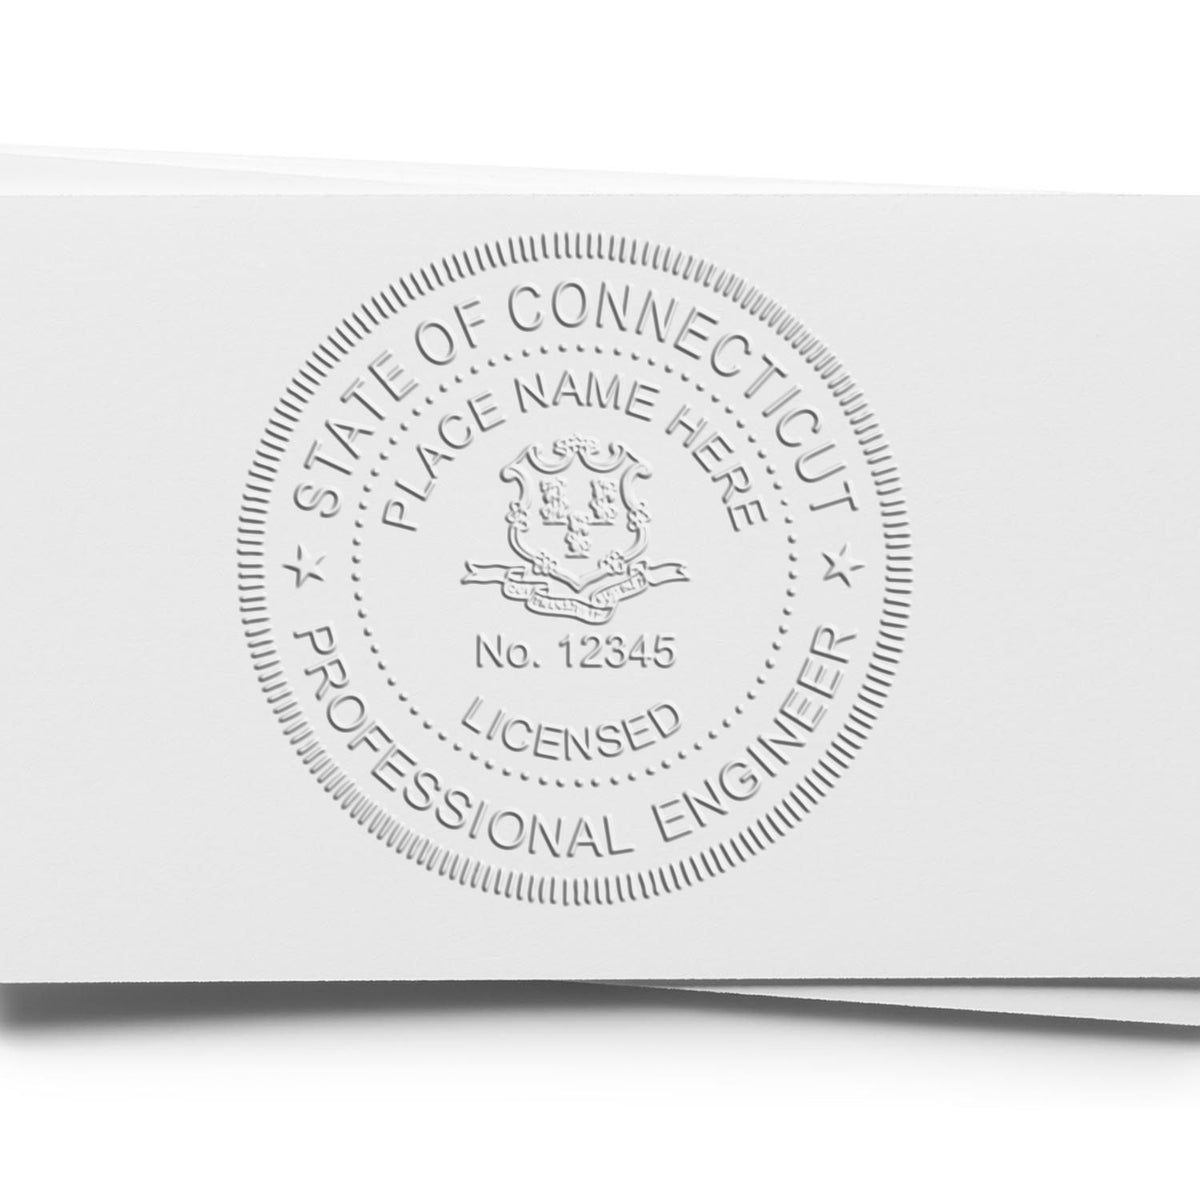 A stamped impression of the Connecticut Engineer Desk Seal in this stylish lifestyle photo, setting the tone for a unique and personalized product.